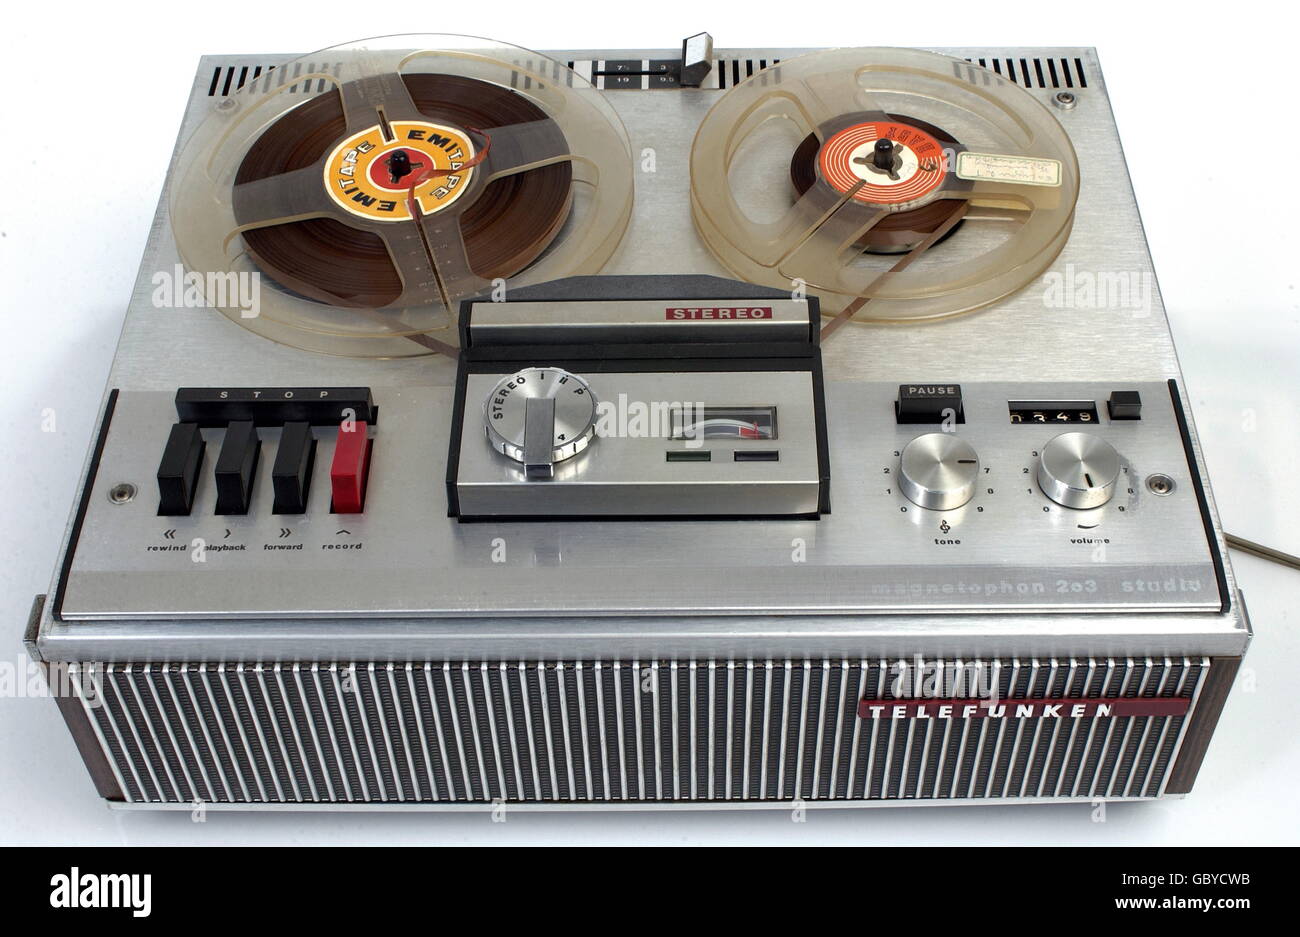 technics, tape recorders, Telefunken stereo tape recorder "magnetophon  203", 1967, Additional-Rights-Clearences-Not Available Stock Photo - Alamy